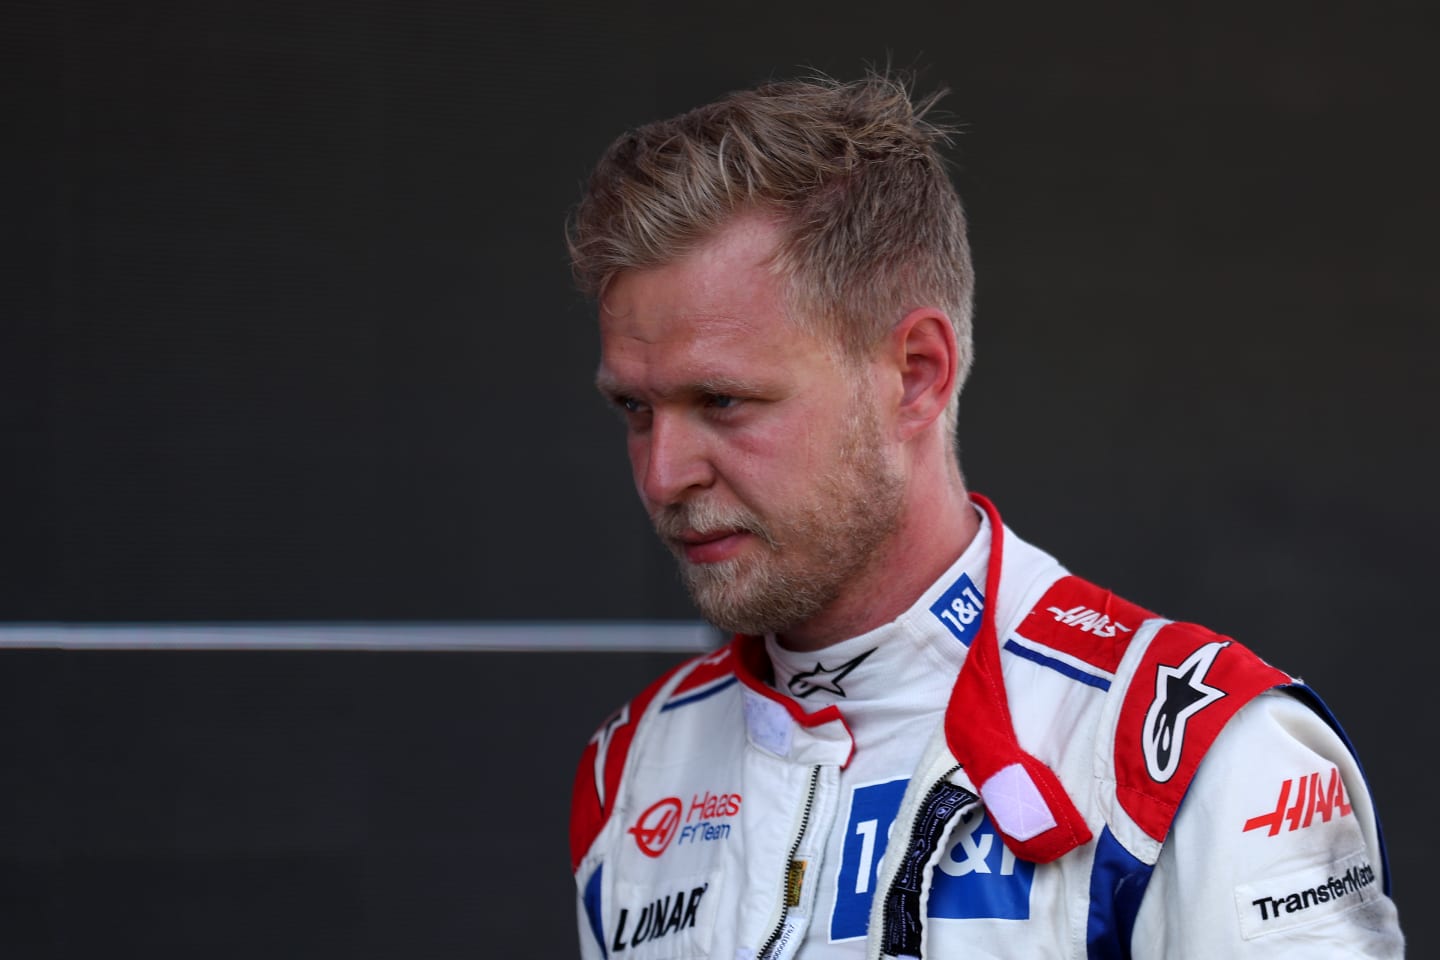 BARCELONA, SPAIN - MAY 22: 17th placed Kevin Magnussen of Denmark and Haas F1 walks in parc ferme during the F1 Grand Prix of Spain at Circuit de Barcelona-Catalunya on May 22, 2022 in Barcelona, Spain. (Photo by Bryn Lennon - Formula 1/Formula 1 via Getty Images)